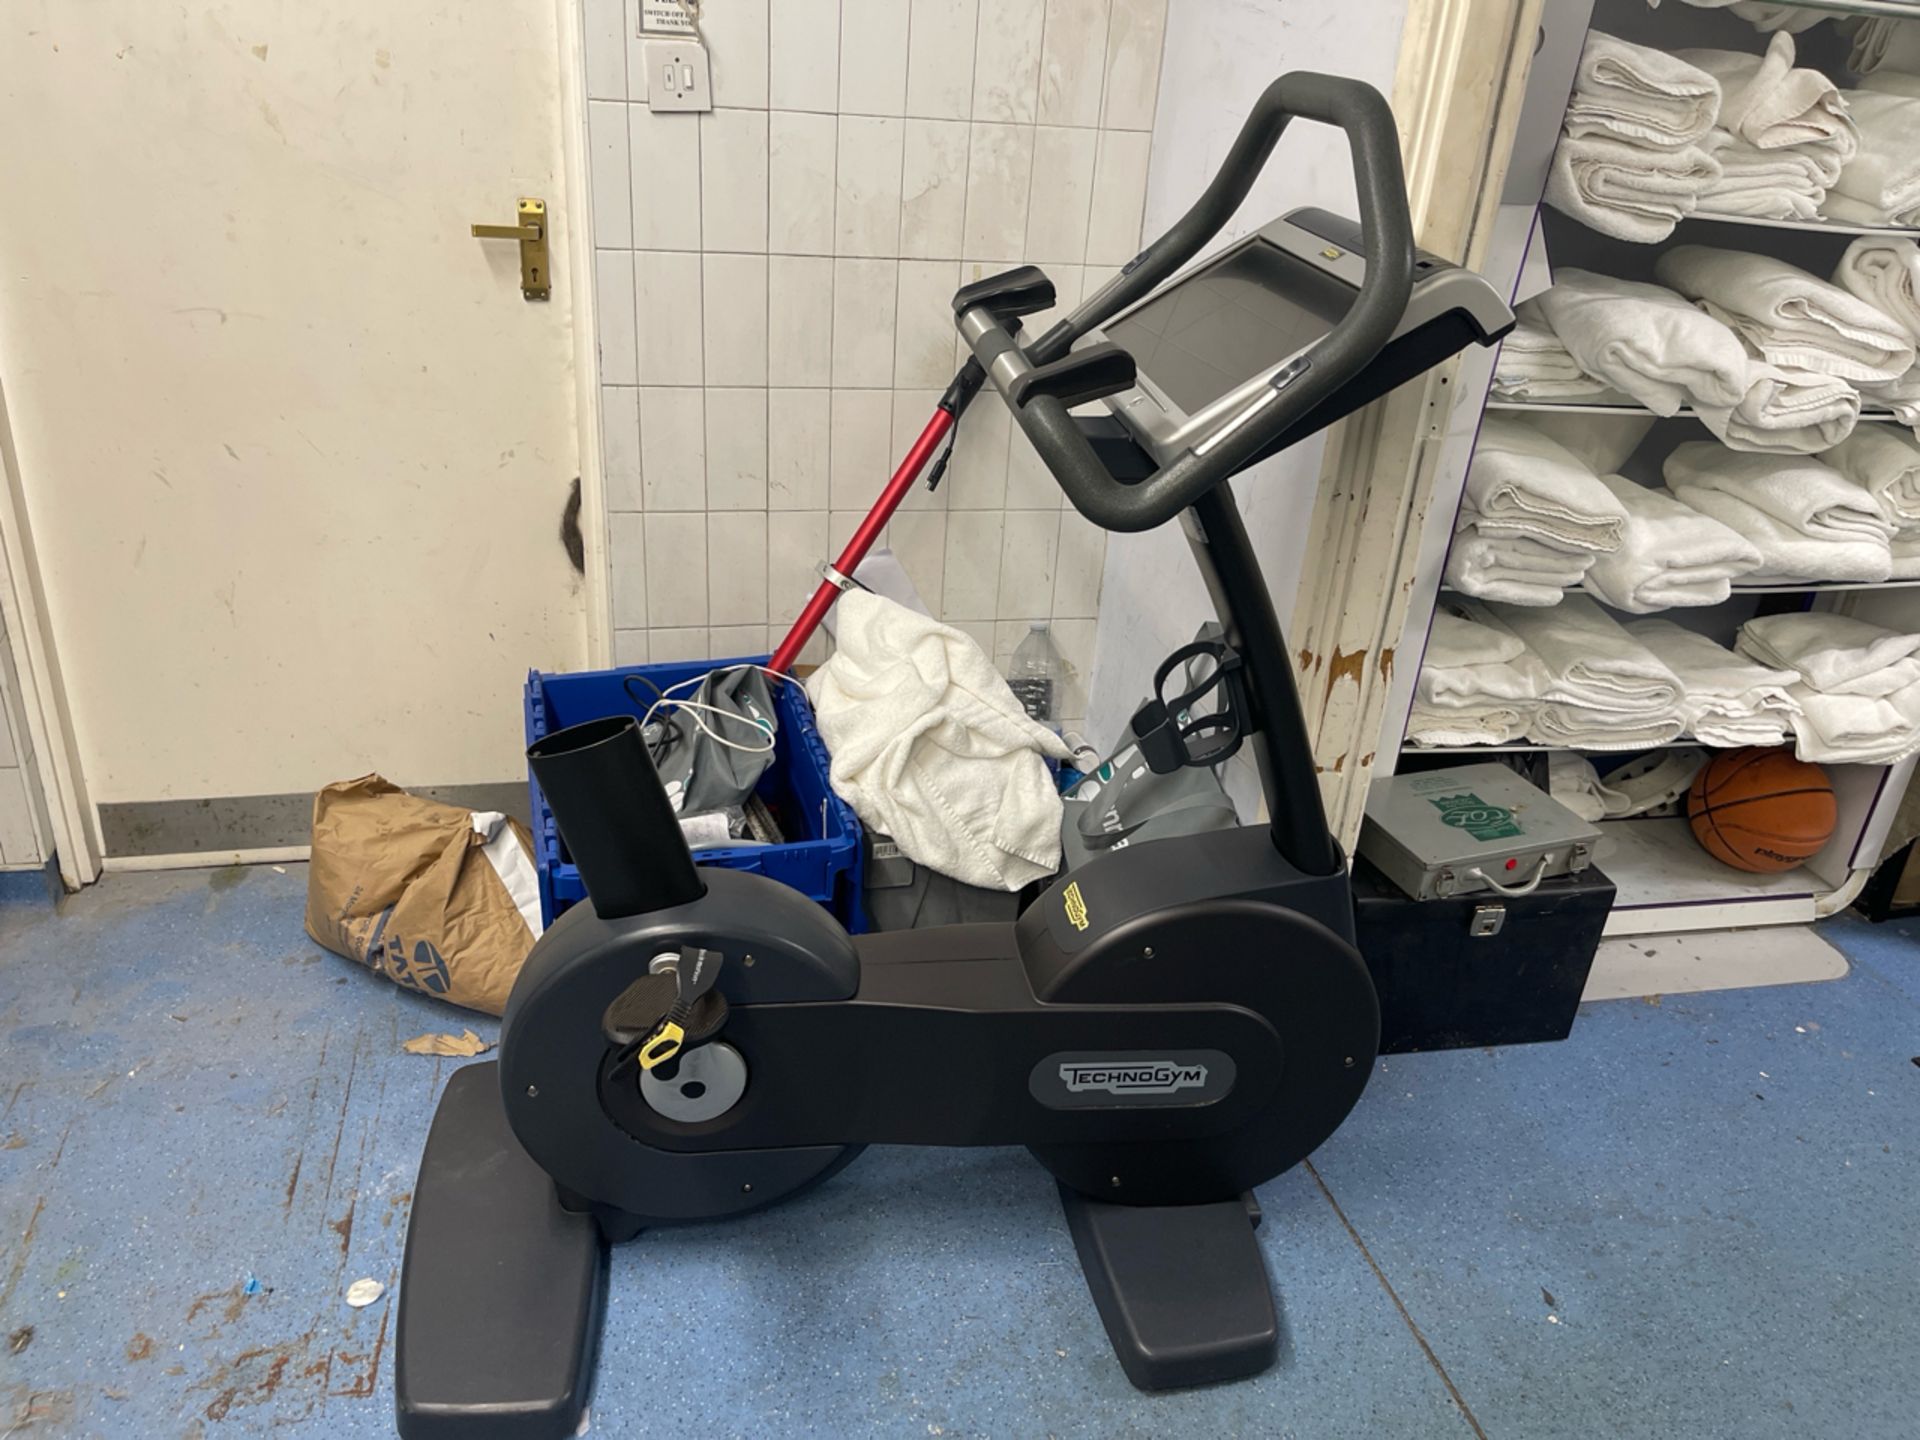 Technogym Upright Bike For Spares & Repairs - Image 2 of 6